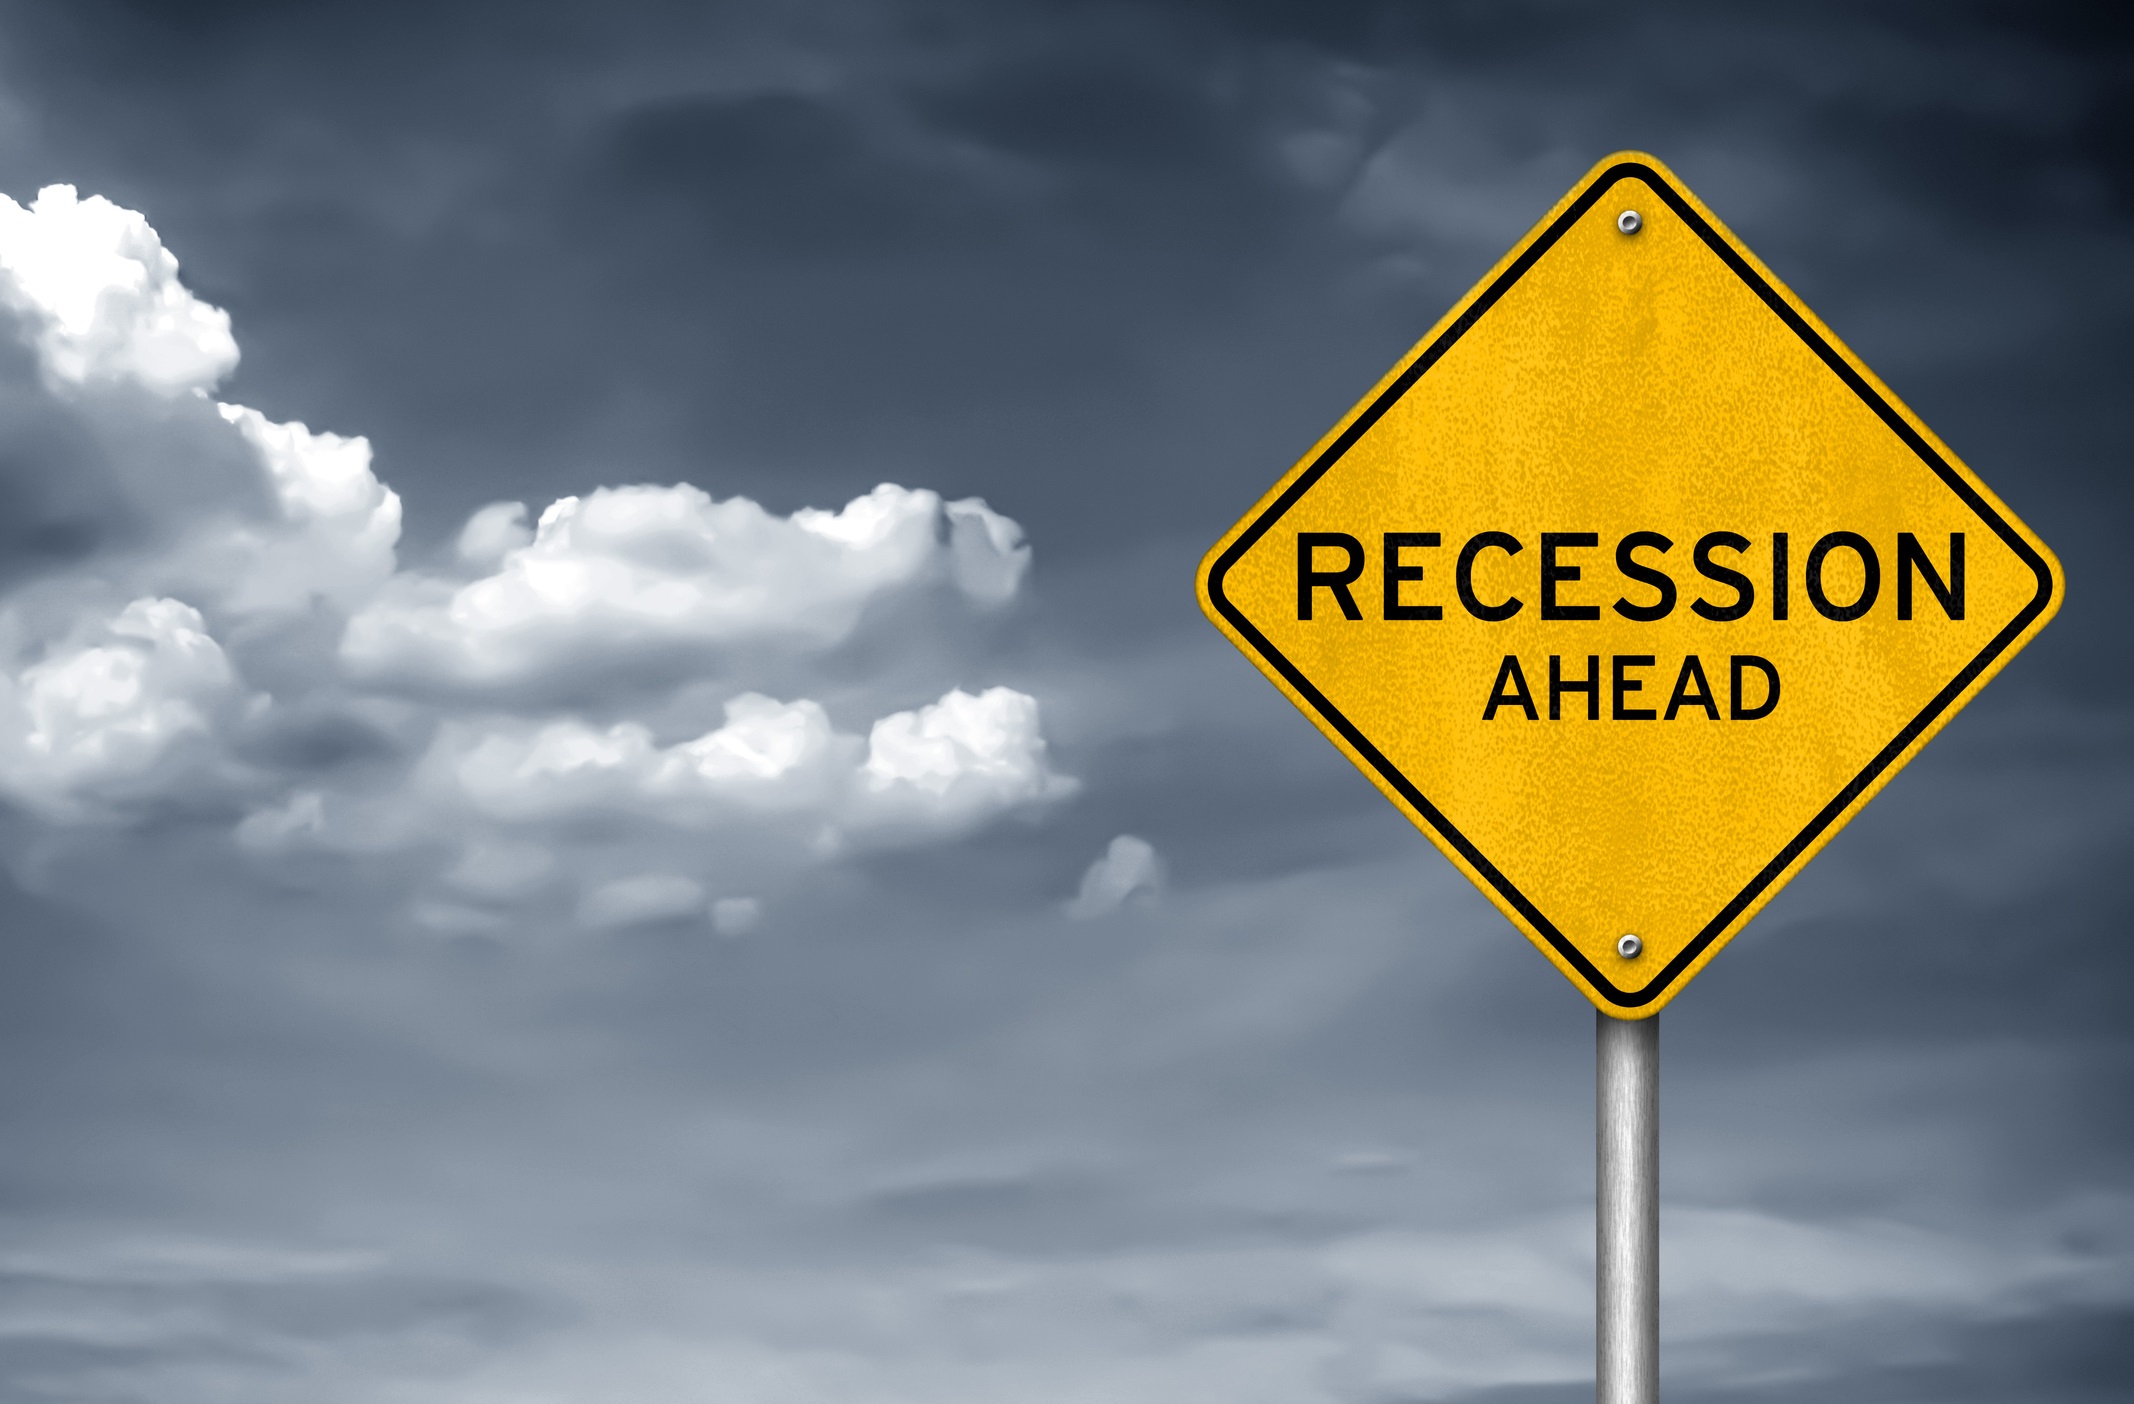 A yellow road sign warns "Recession Ahead" amidst a backdrop of storm clouds for self-fulfilling prophecy of recession blog.